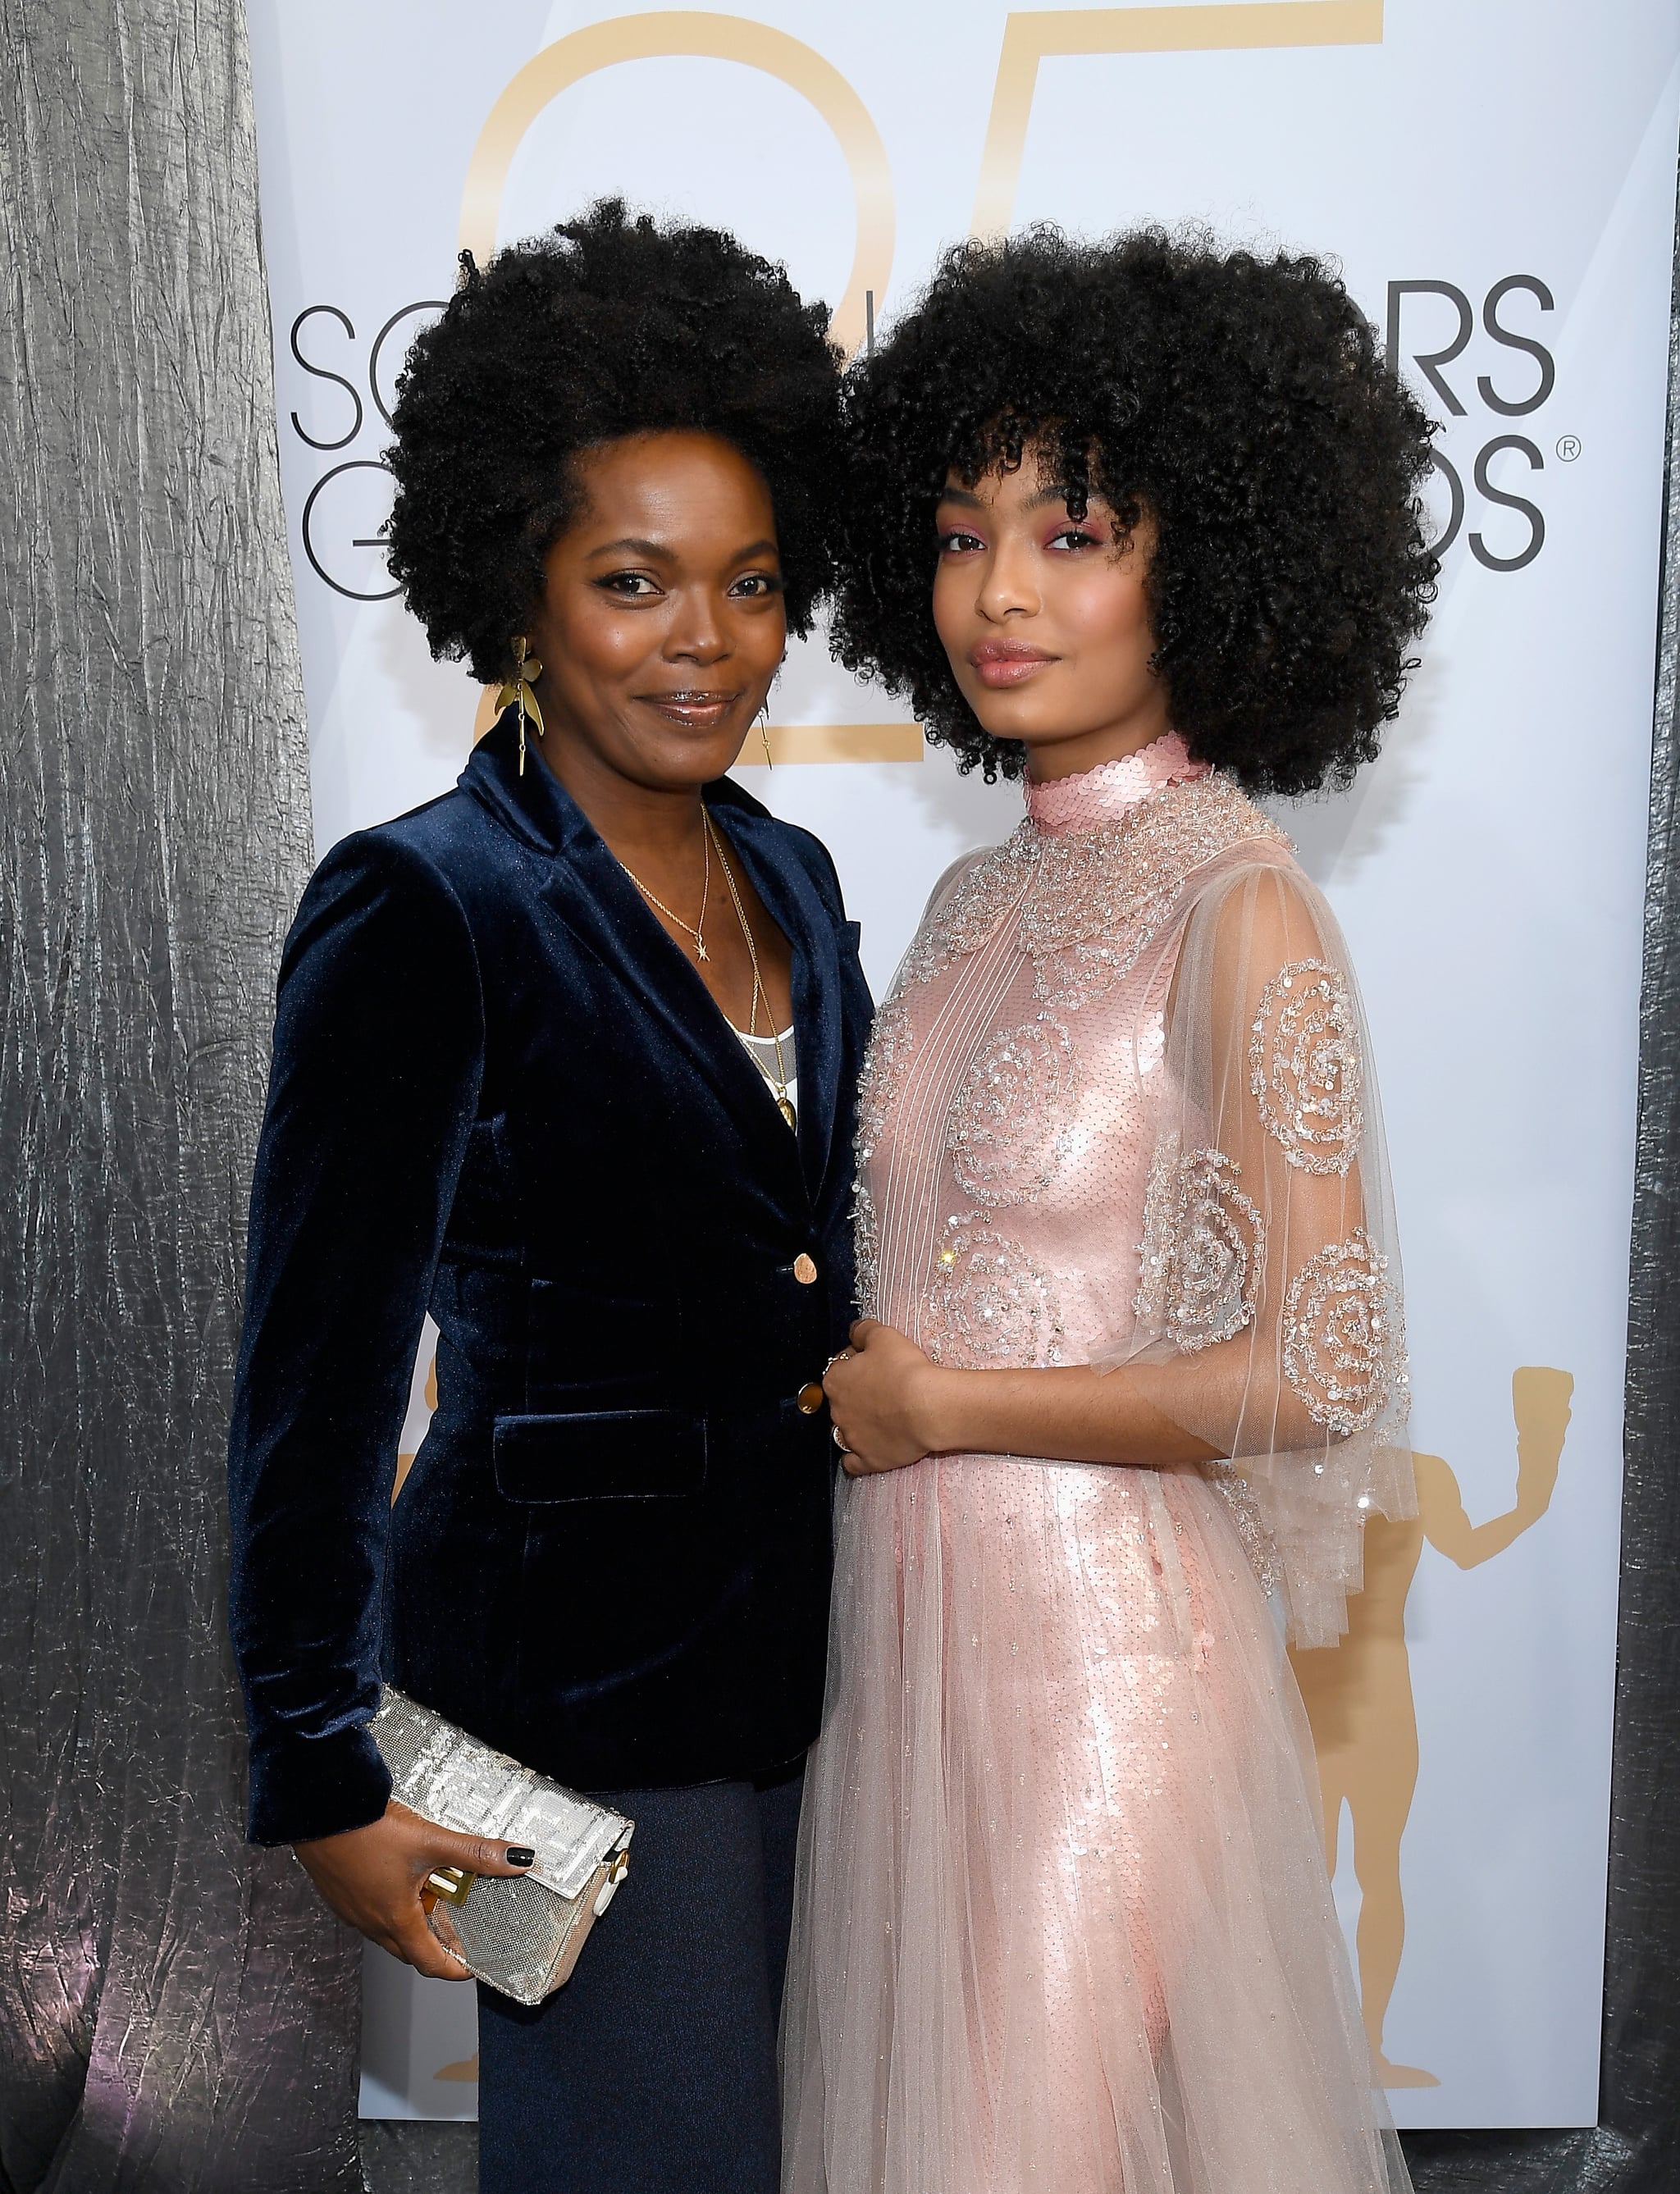 LOS ANGELES, CA - JANUARY 27:  Keri Shahidi and Yara Shahidi attend the 25th Annual Screen Actors Guild Awards at The Shrine Auditorium on January 27, 2019 in Los Angeles, California.  (Photo by Kevork Djansezian/Getty Images)